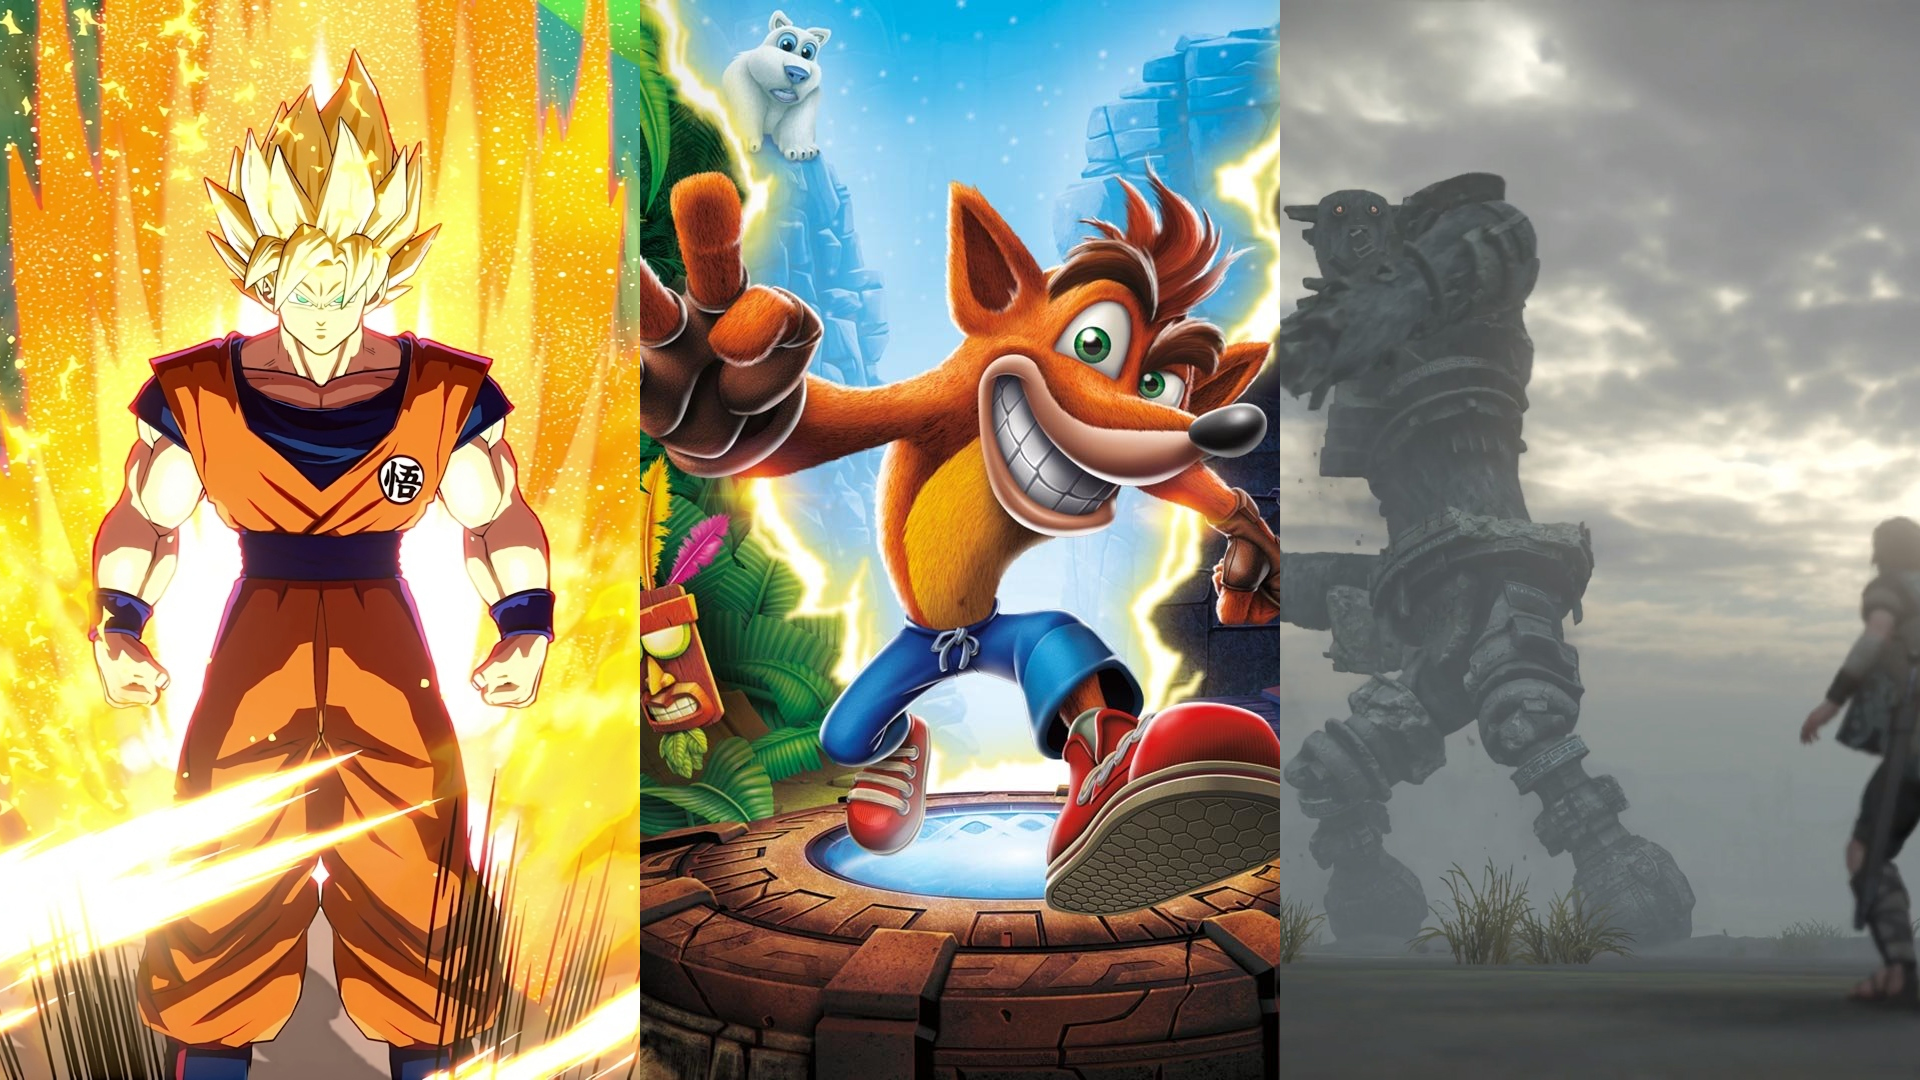 Top 10 Communauté 2018 Dragon Ball Fighter Z, Crash Bandicoot, Shadow of the Colossus